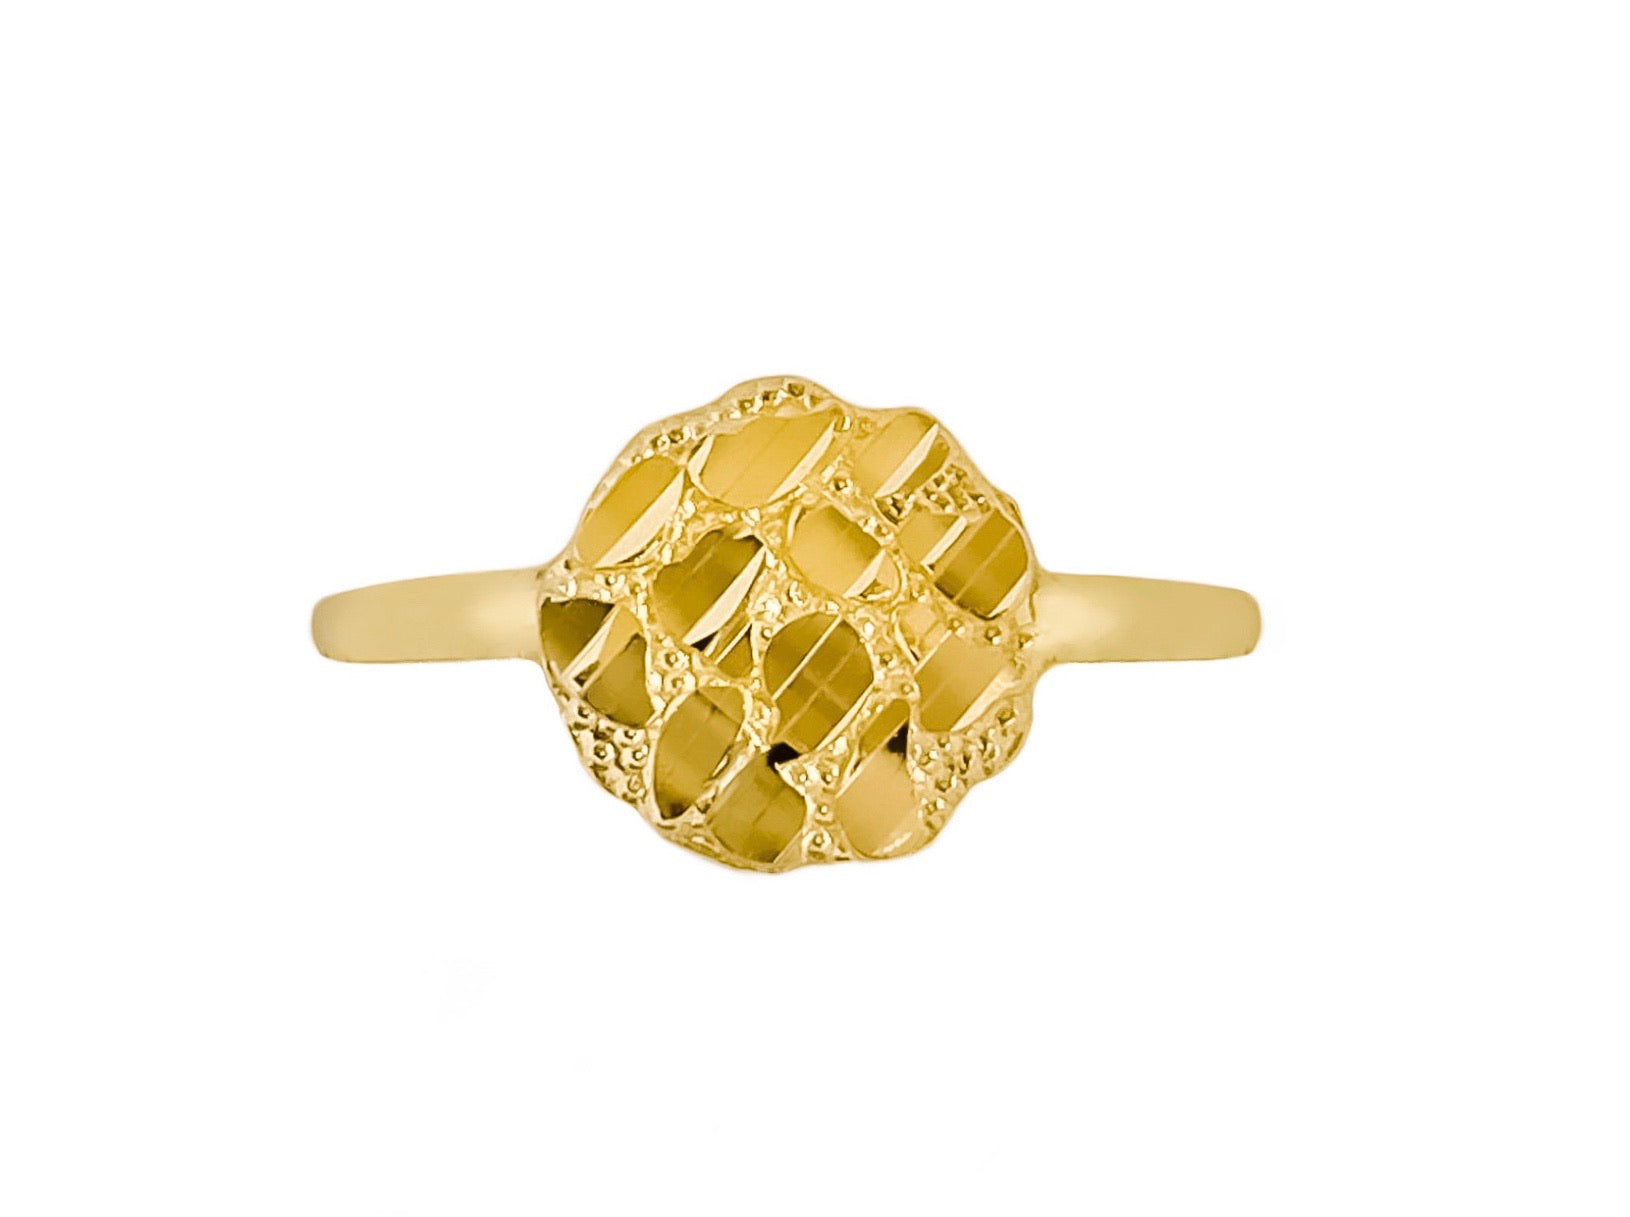 10K YELLOW GOLD NUGGET CLUSTER RING